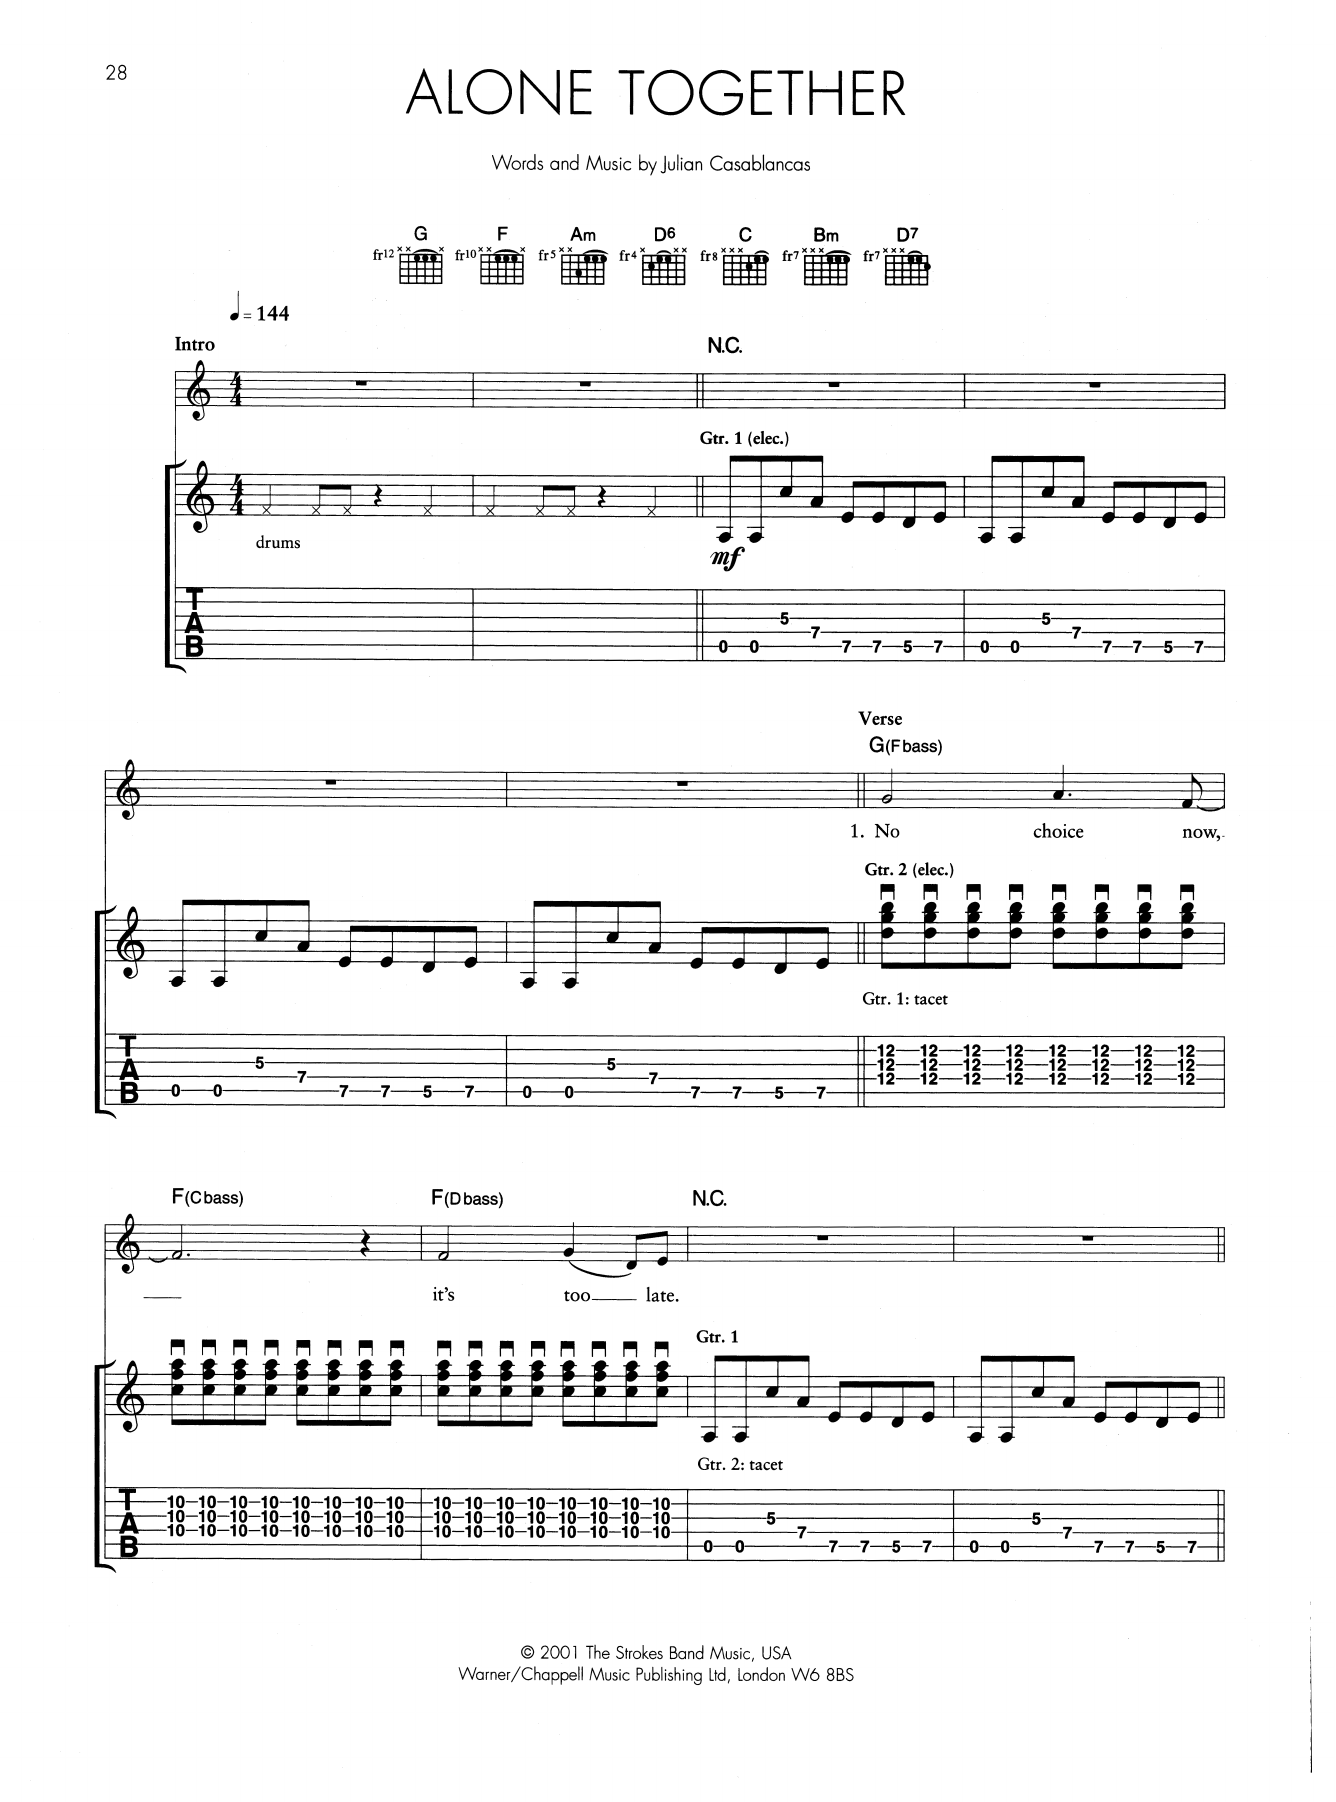 Download The Strokes Alone Together Sheet Music